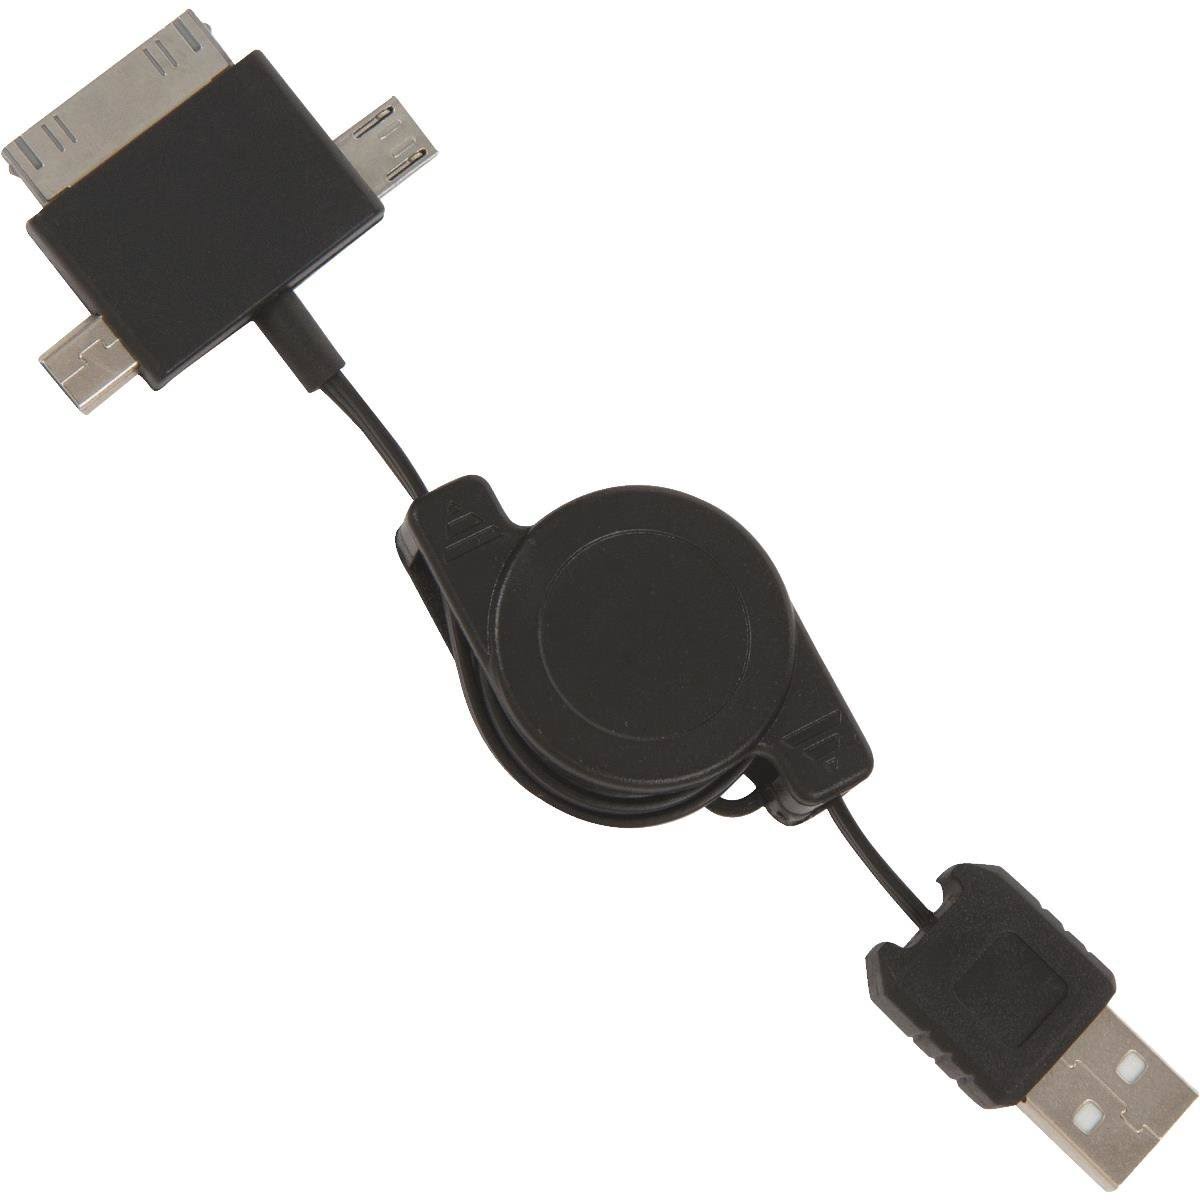 Get Power USB Charging Cable 3 ft.